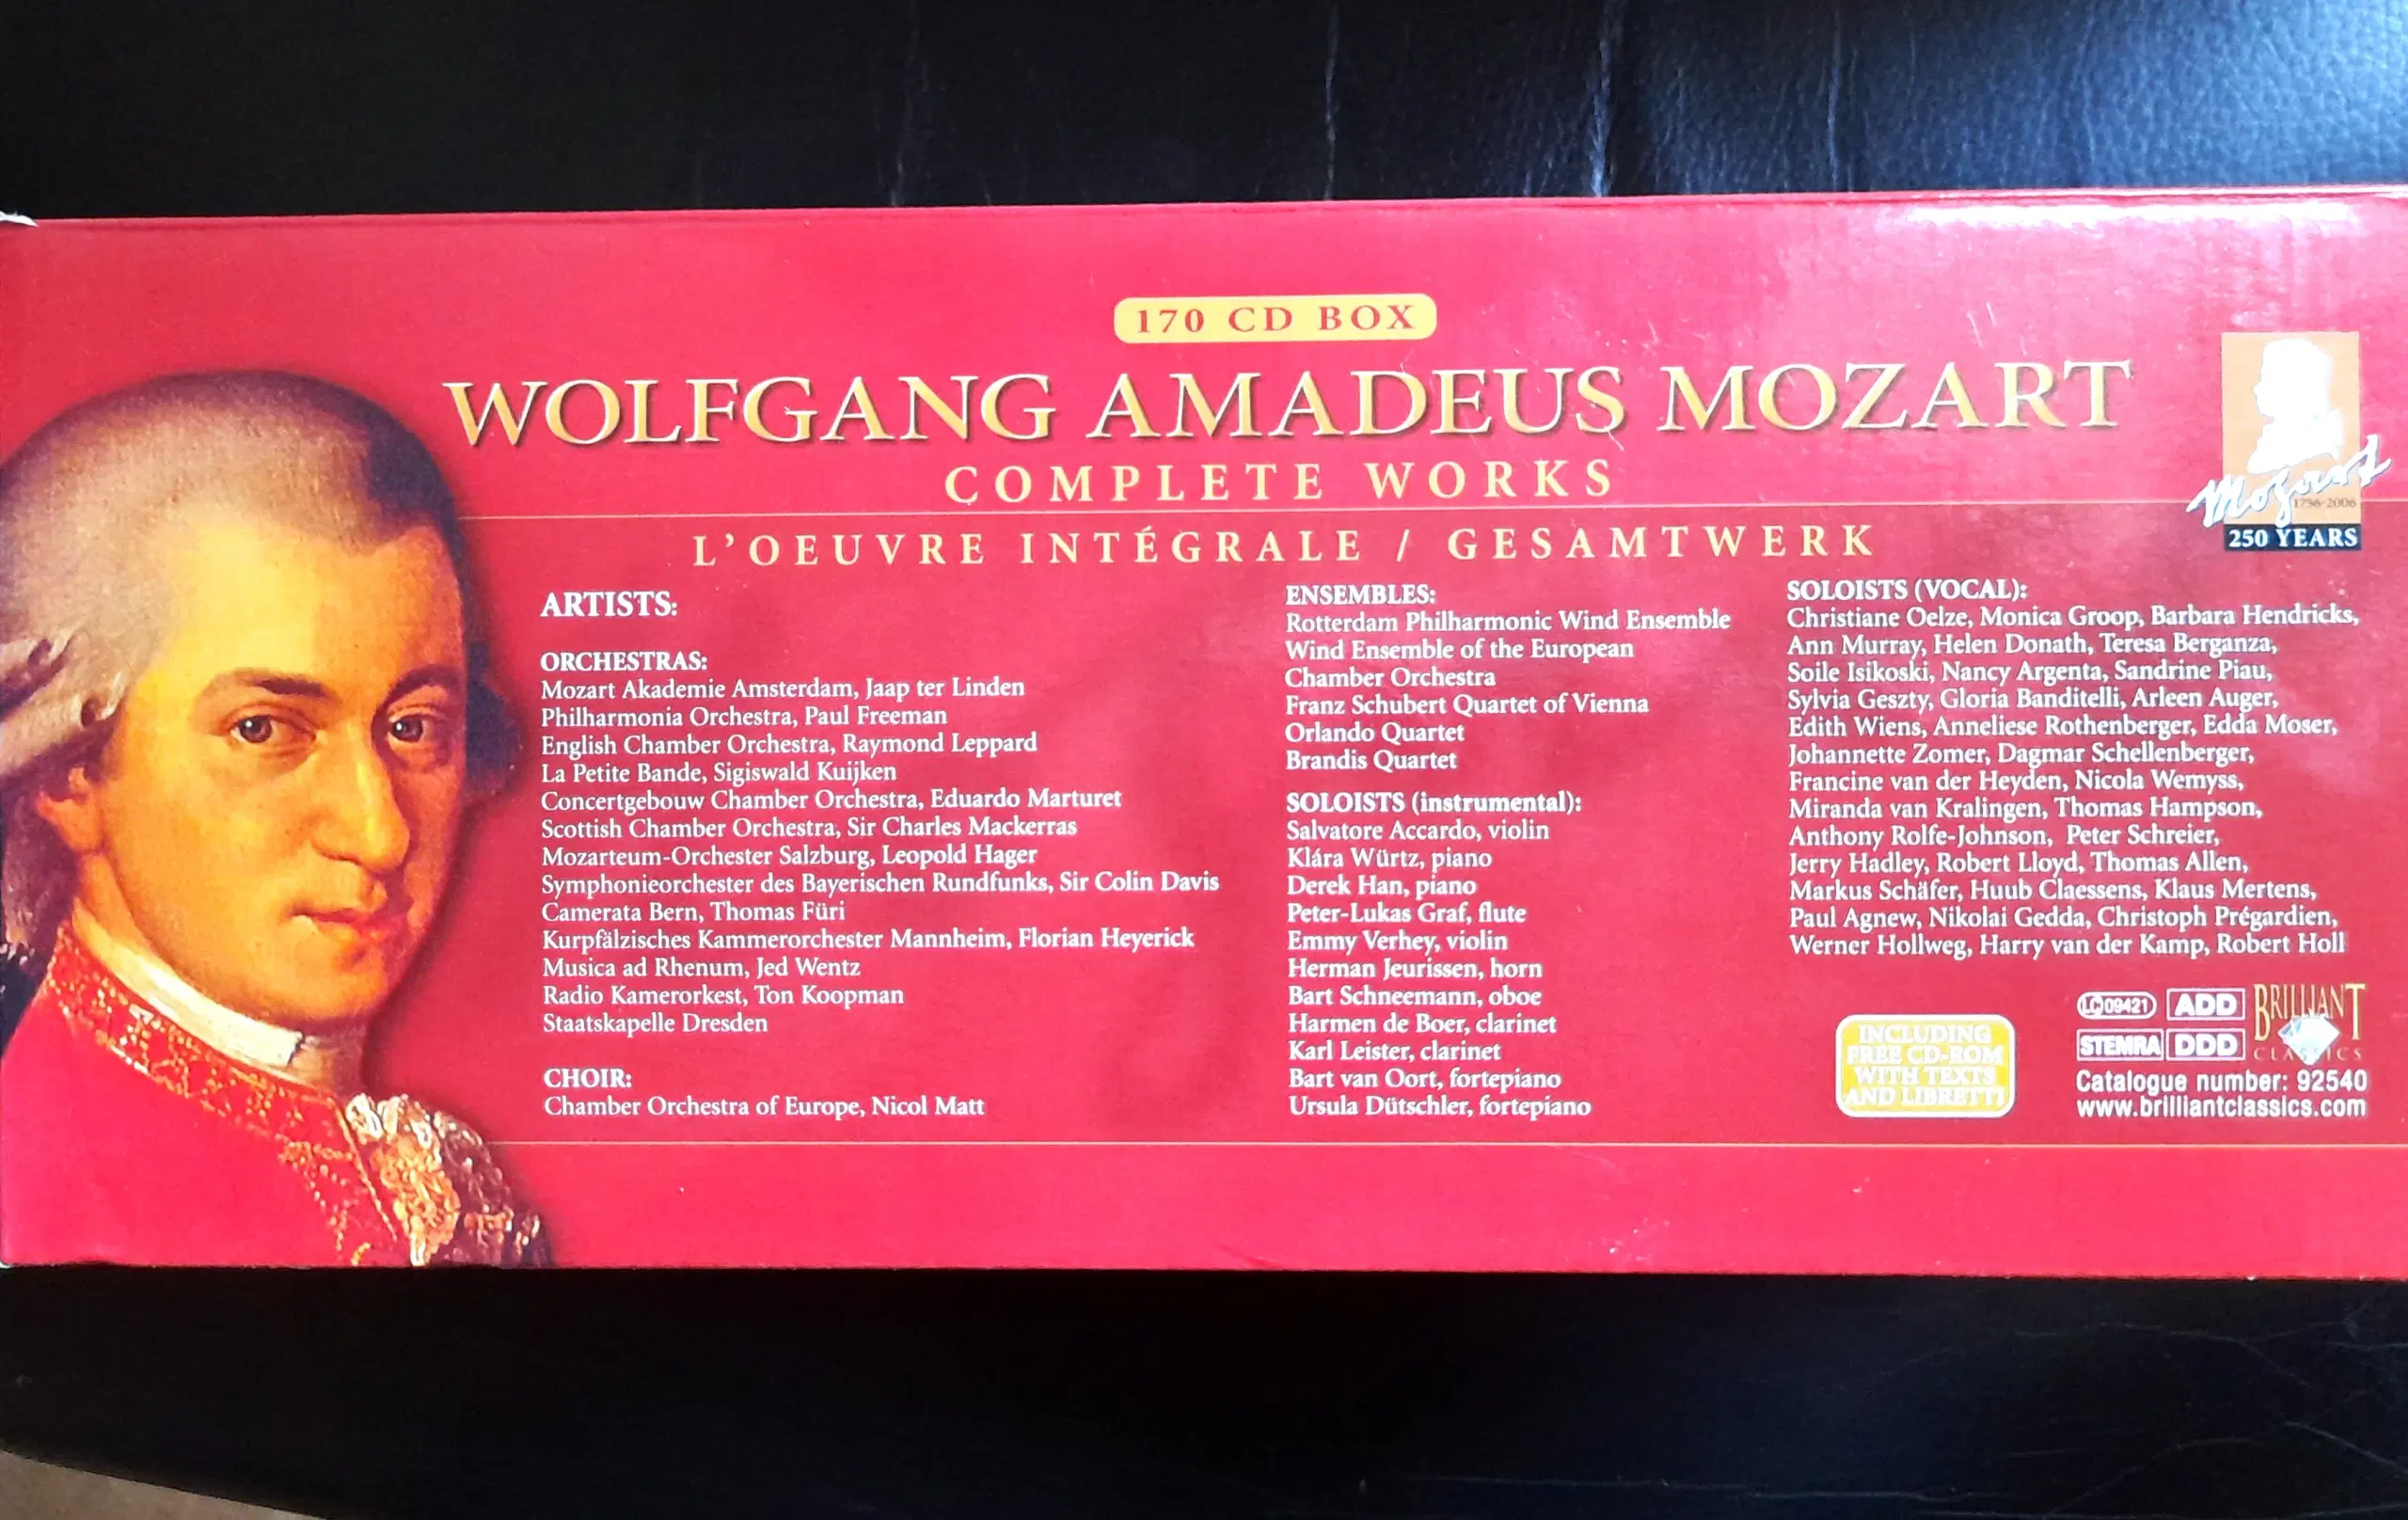 WOLFGANG AMADEUS MOZART COMPLETE WORKS 170! CD BOX